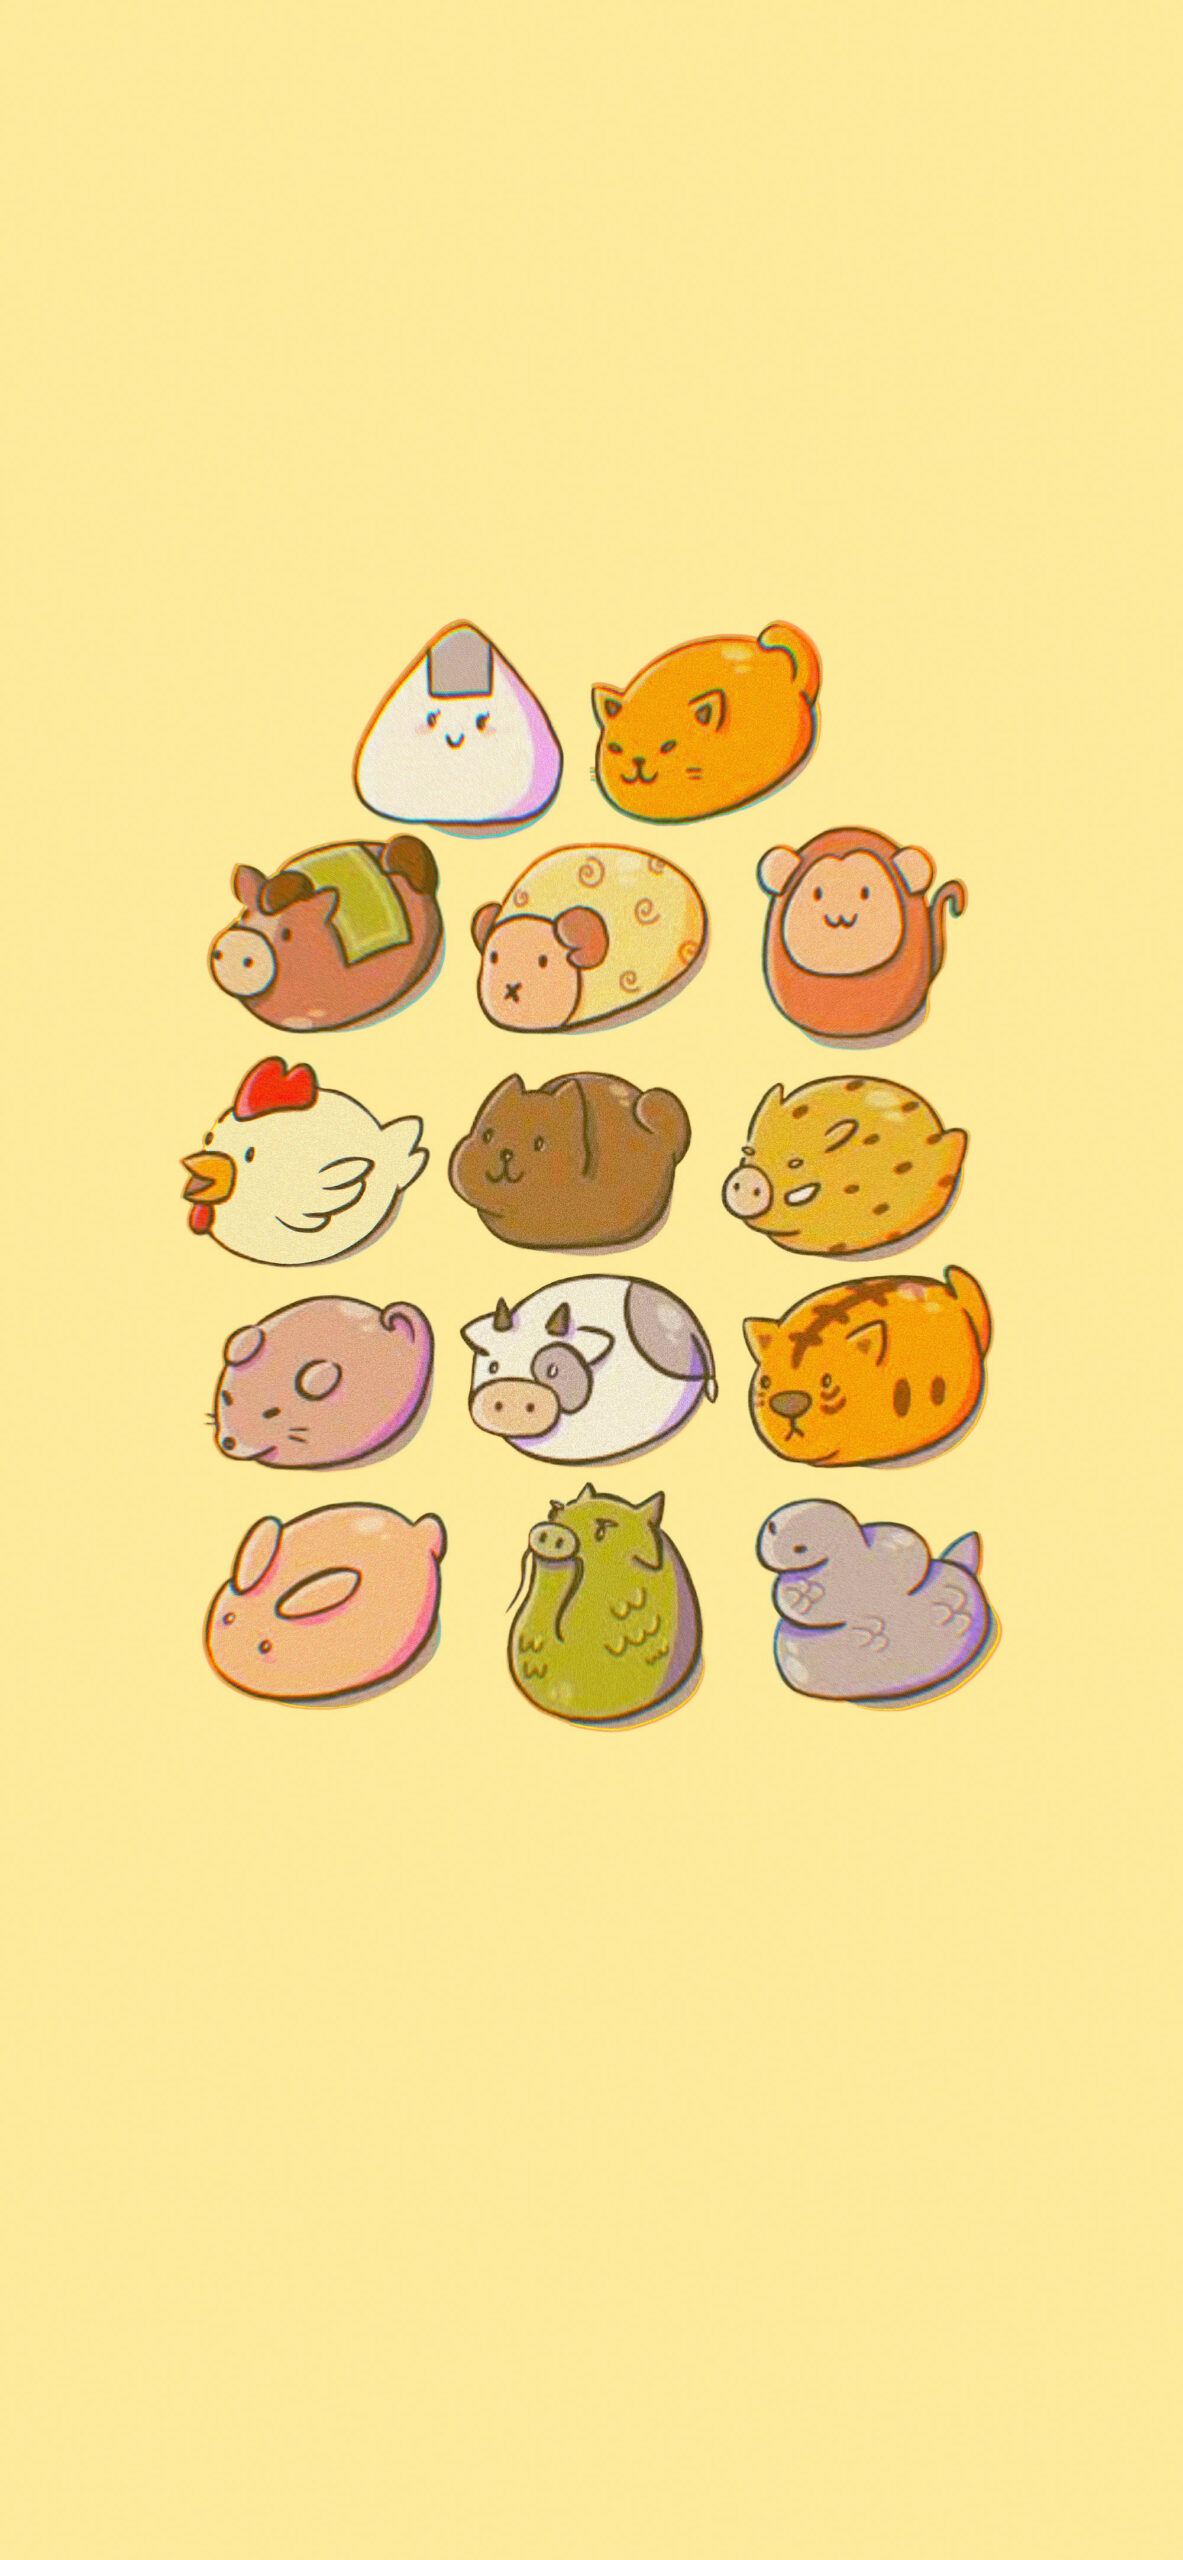 Fruits Basket Cute Zodiac Animals Wallpapers - Anime Wallpapers